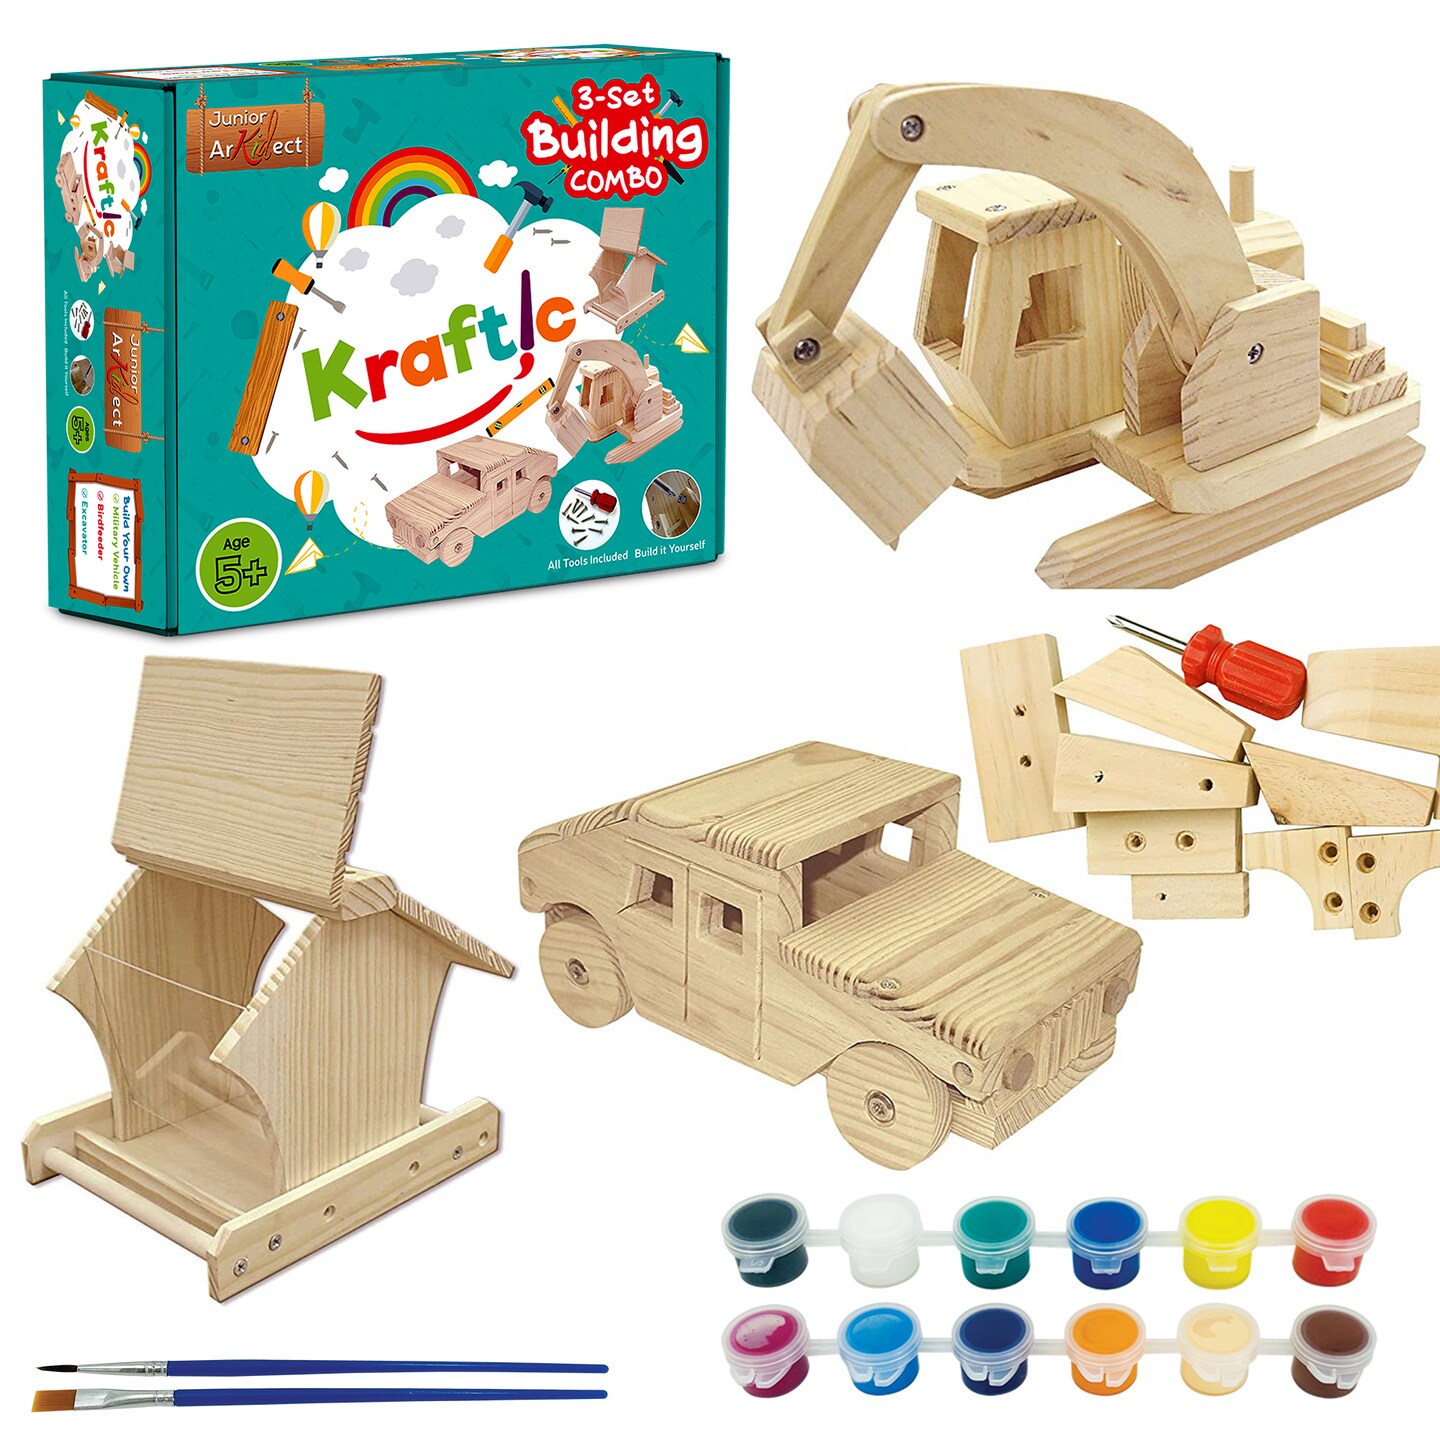 Kraftic Woodworking Building Kit for Kids and Adults, 3 Educational DIY  Carpentry Construction Wood Model Kit STEM Toy Projects for Boys and Girls  